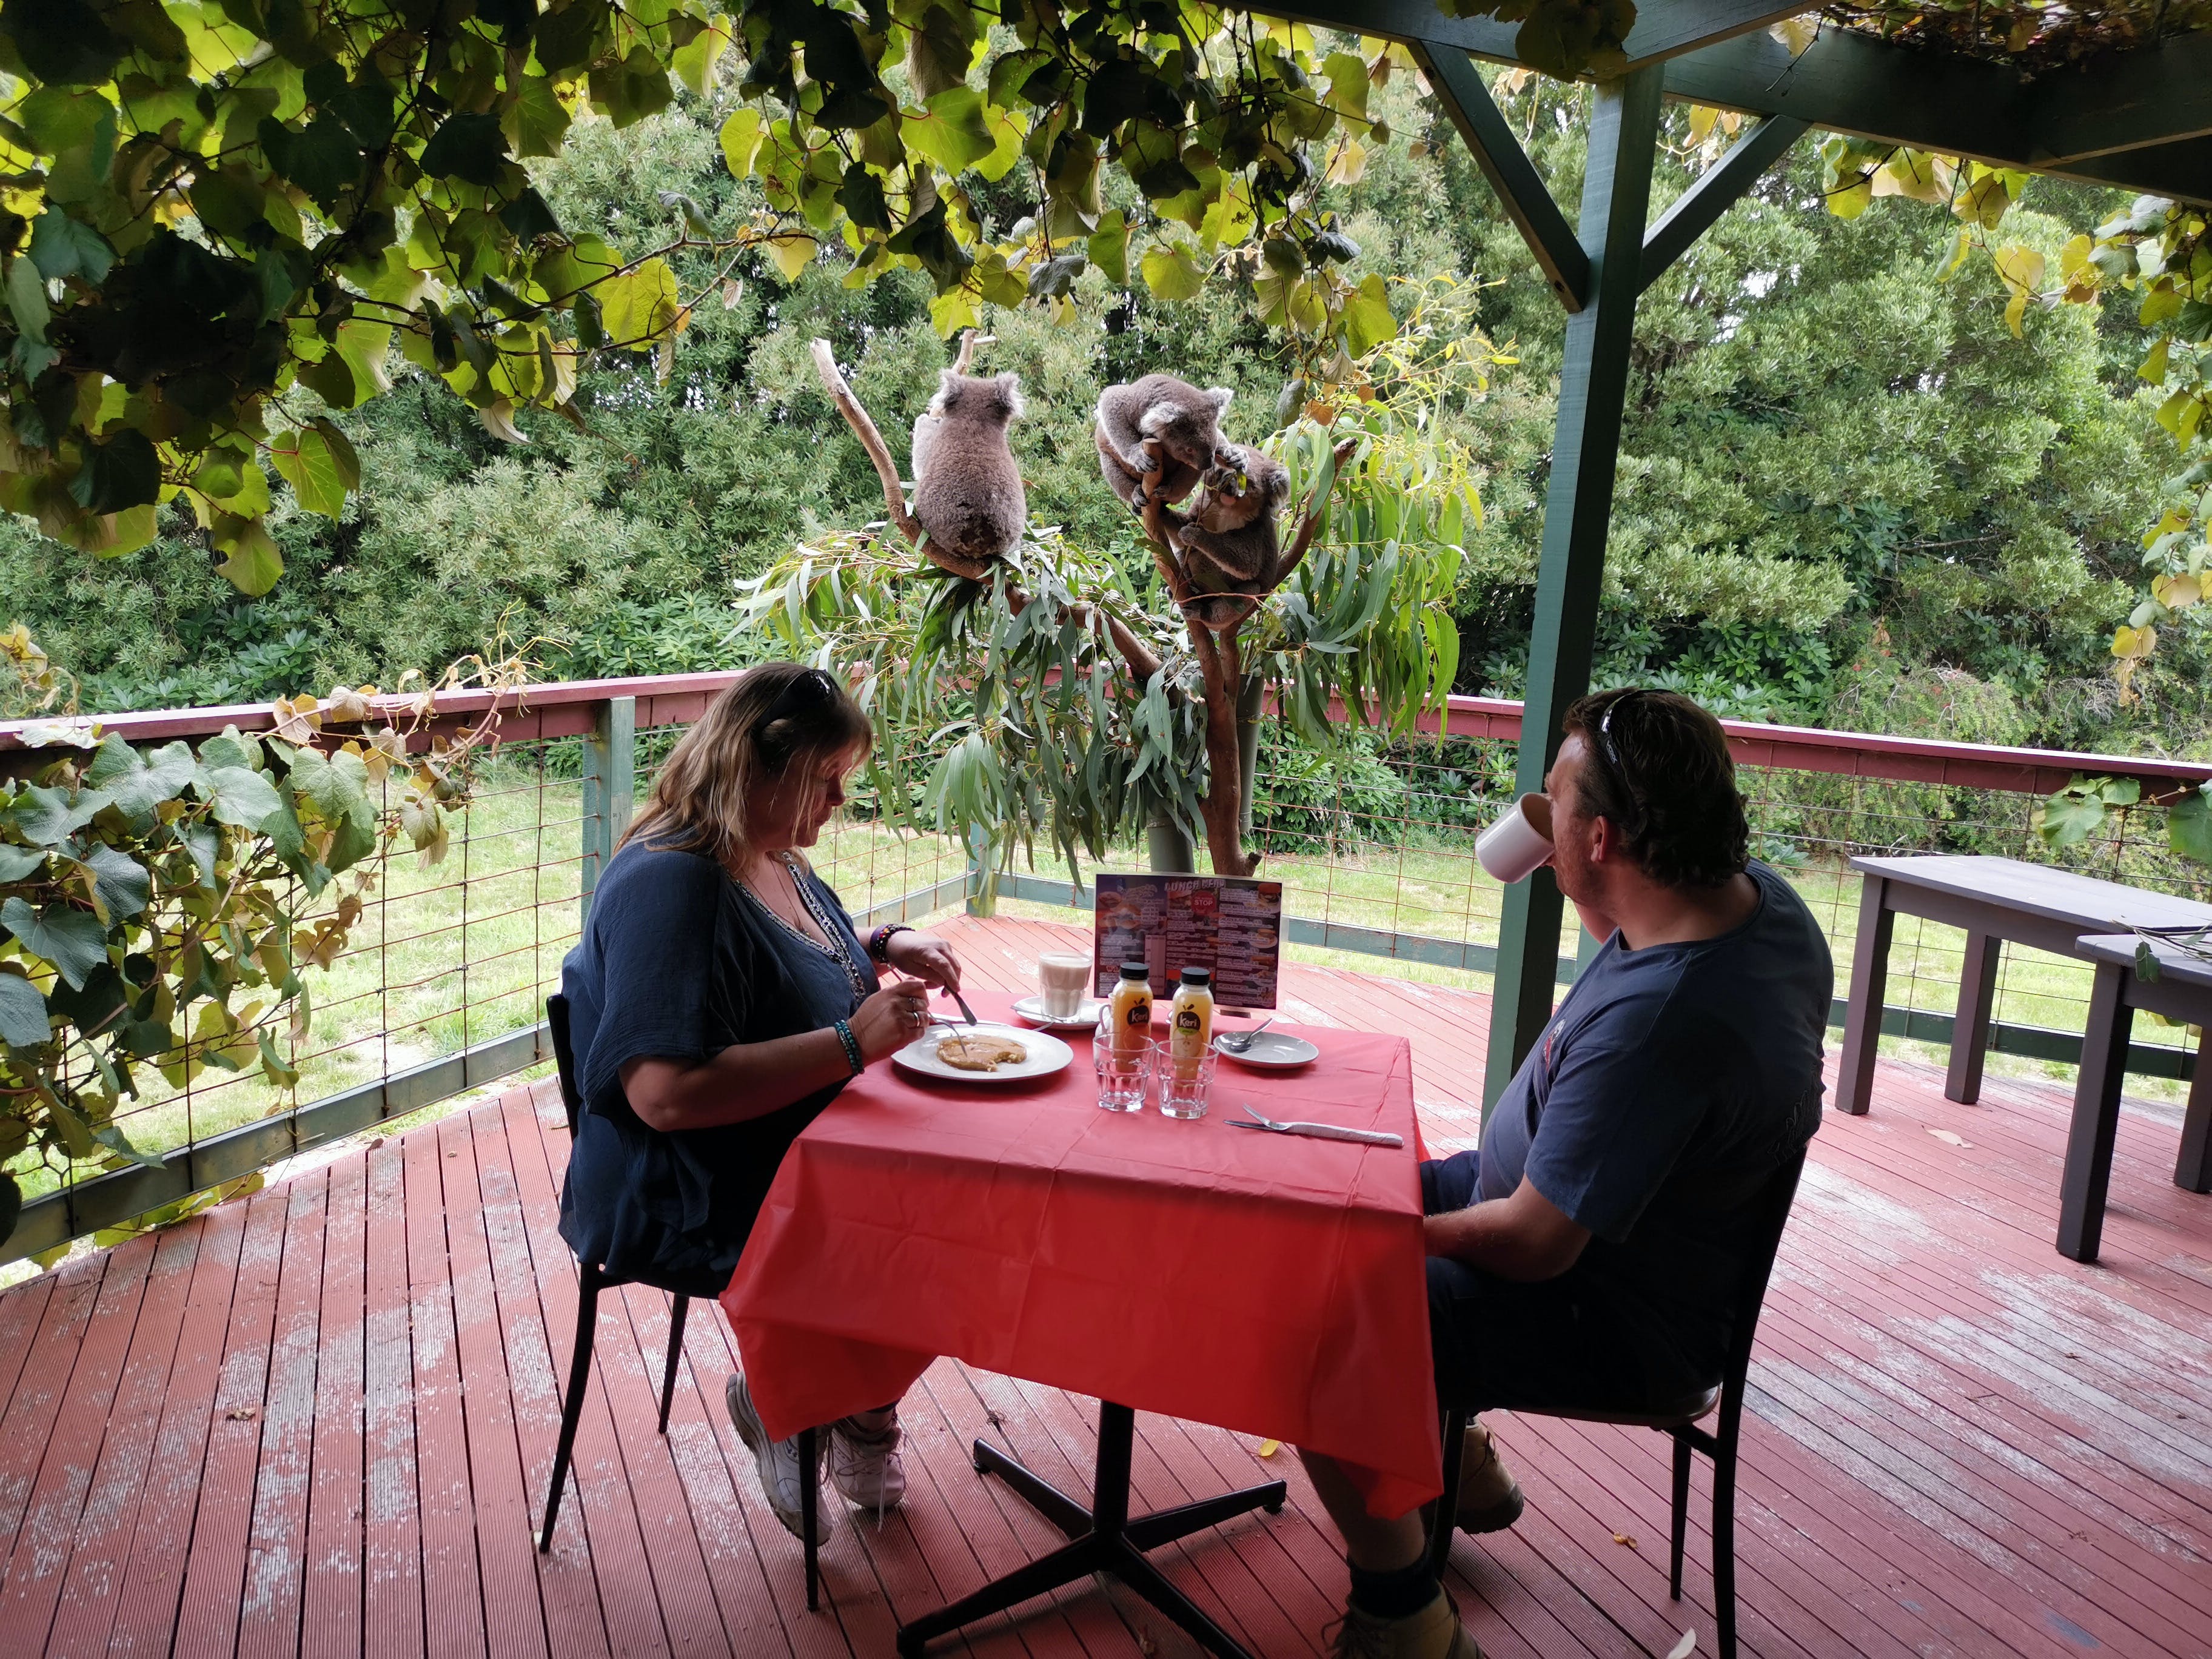 The Aussie Stop offering Breakfast with Koalas - Accommodation Mt Buller